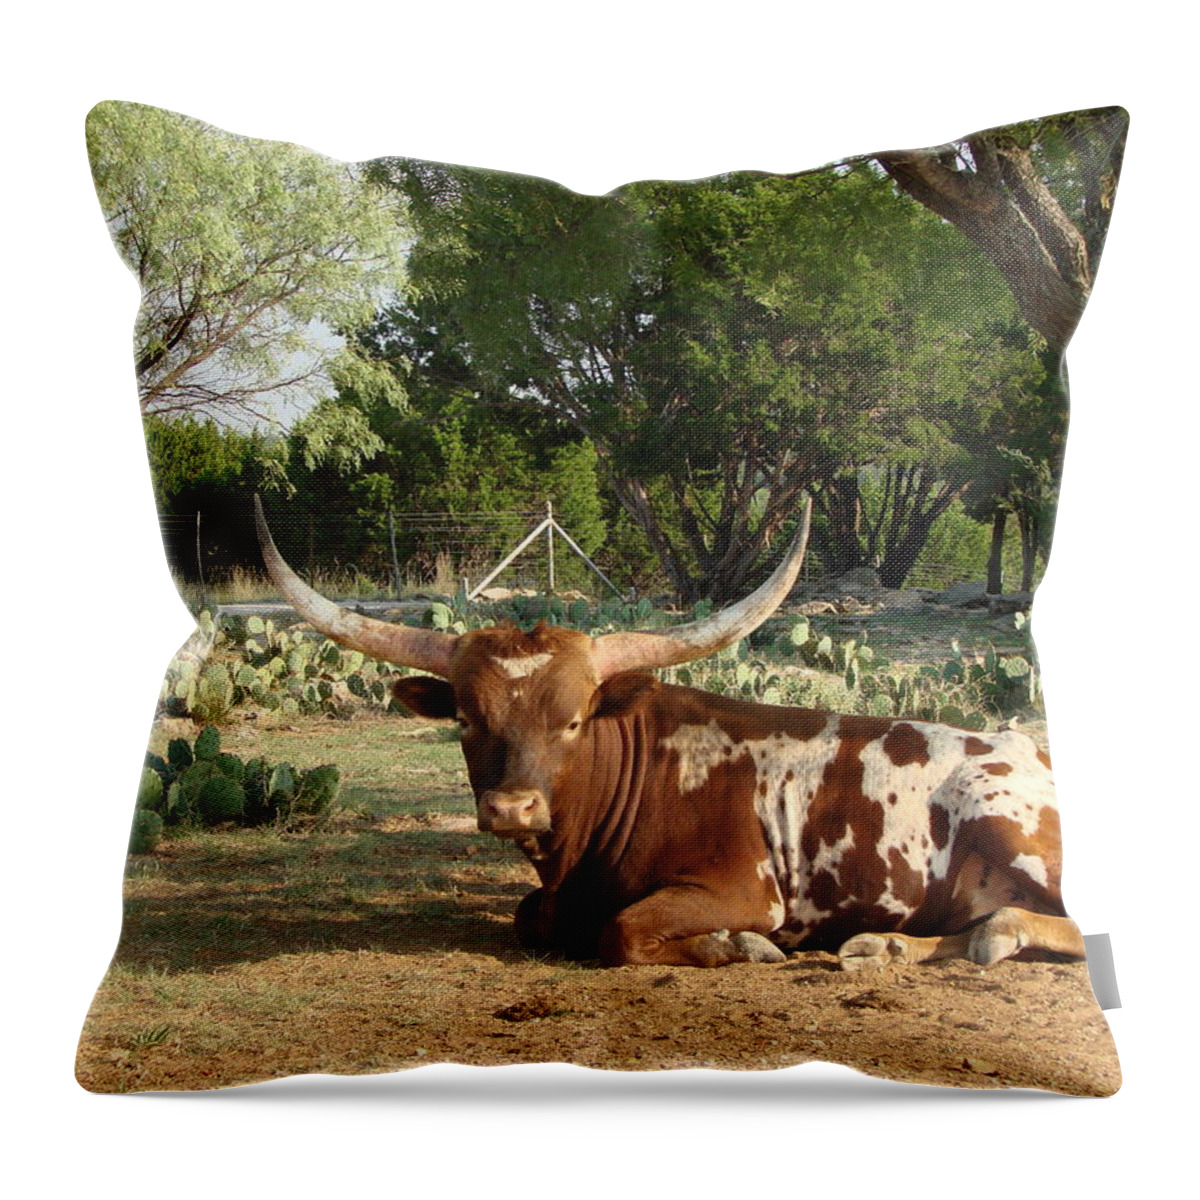 Linda Cox Throw Pillow featuring the photograph Laid Back Longhorn by Linda Cox